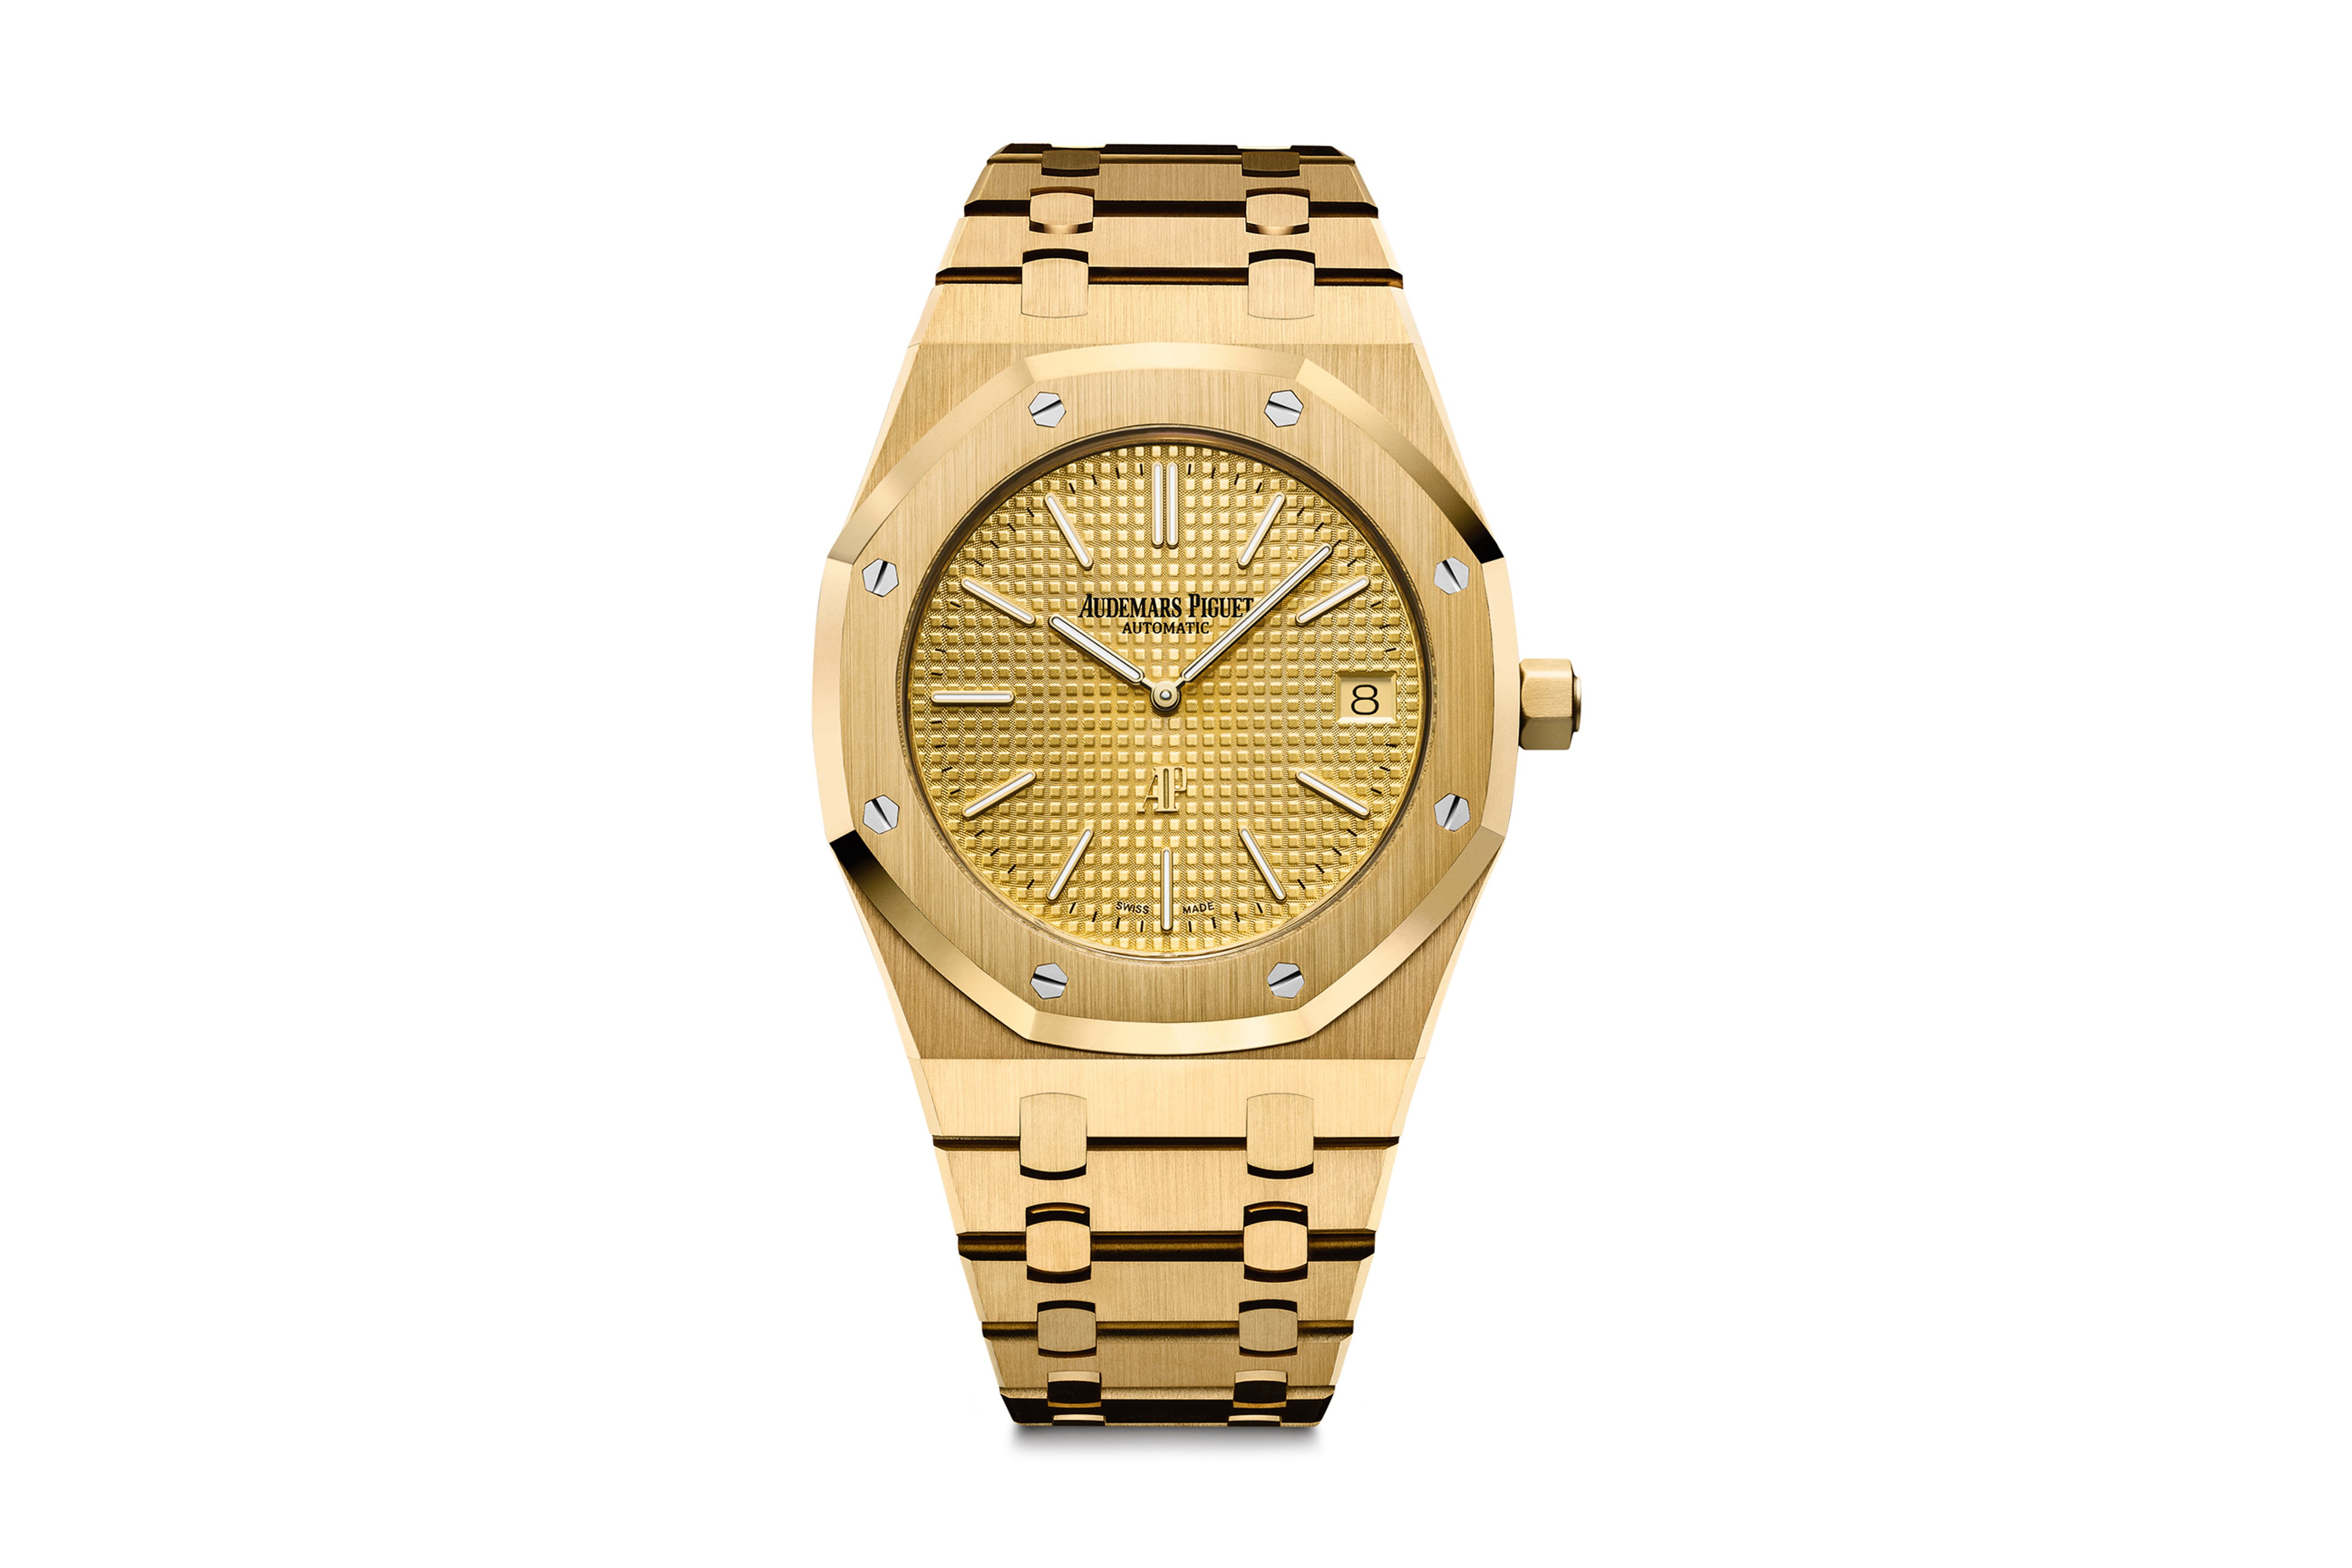 Audemars Piguet's Royal Oak Ultra-Thin Jumbo Is Now Available in Yellow Gold Watches Timepieces Geneva ref. 15202